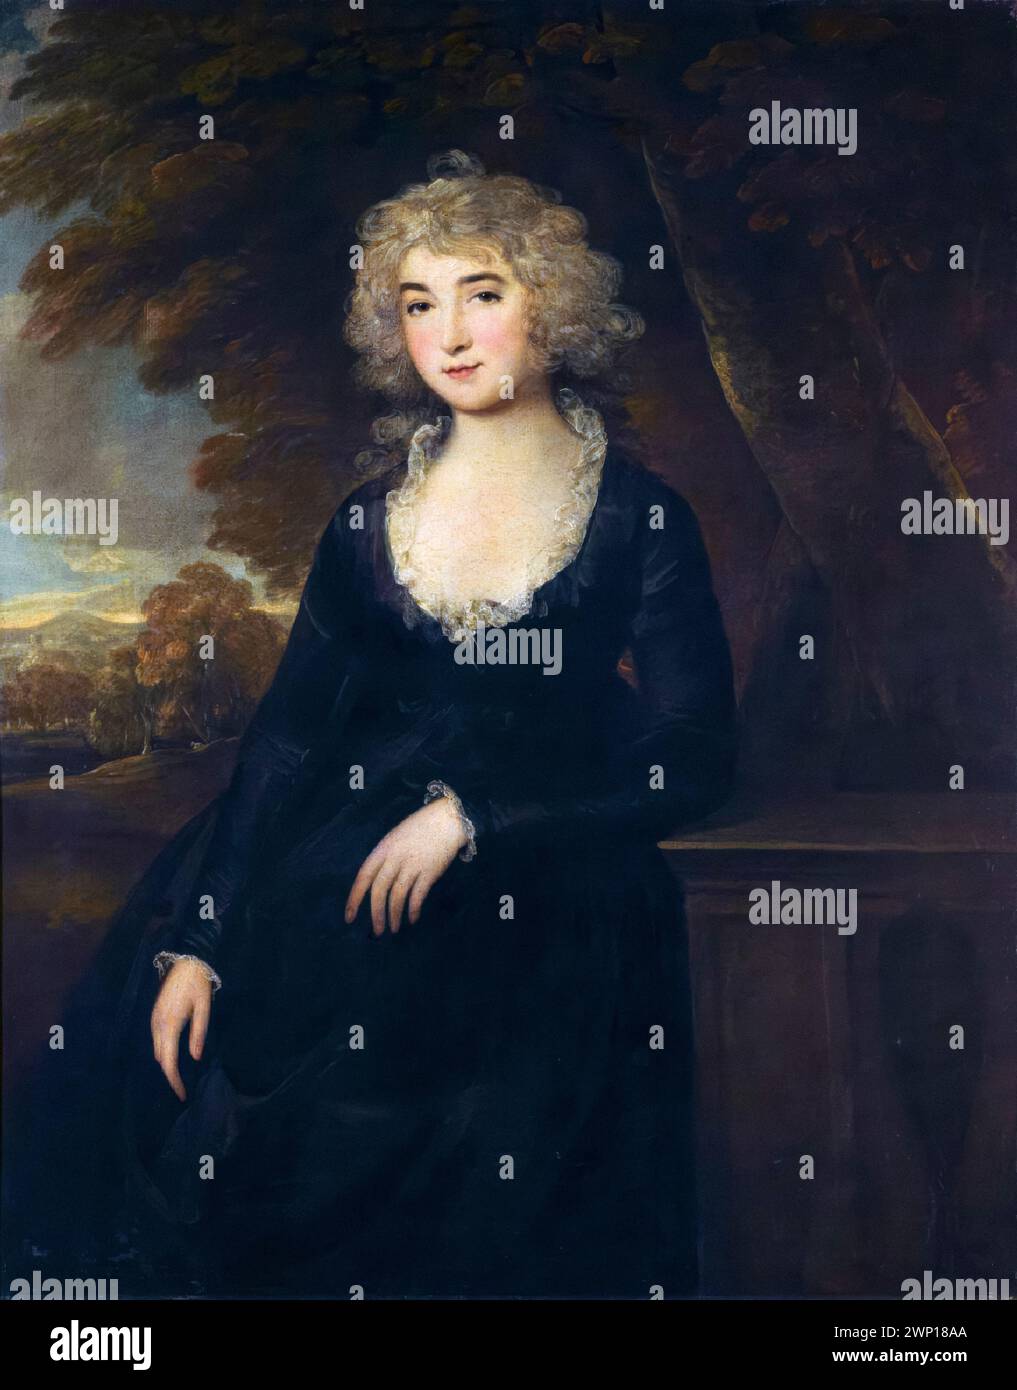 Frances Villiers, Countess of Jersey (née Twysden, 1753-1821), British courtier and Lady of the Bedchamber, mistress of George IV of the United Kingdom, portrait painting in oil on canvas by Thomas Beach, before 1806 Stock Photo